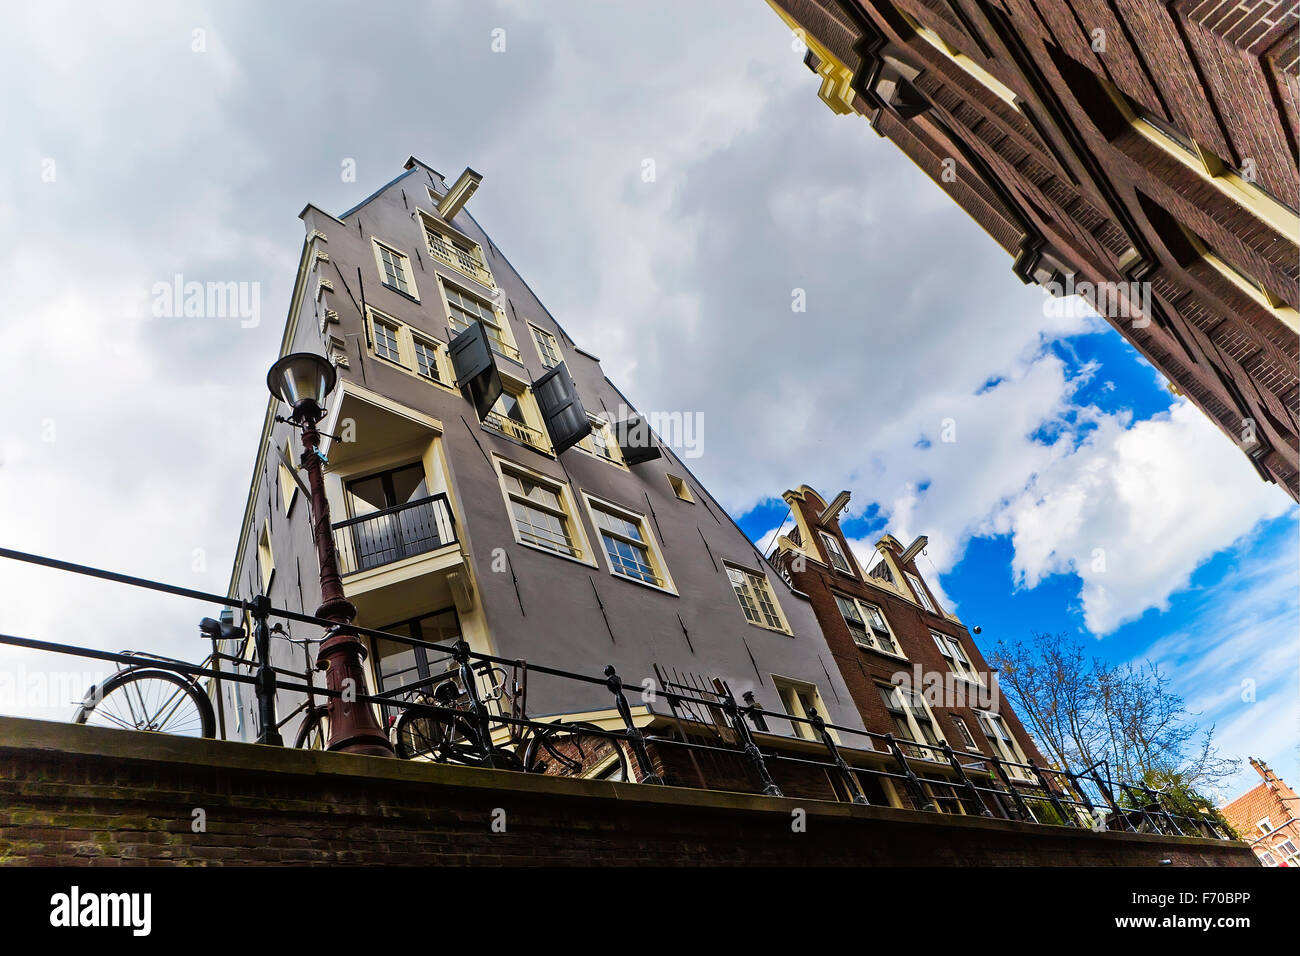 Image of a canal side house situated on a Amsterdam canal and showing the window storm shutters open at the  front of the house Stock Photo